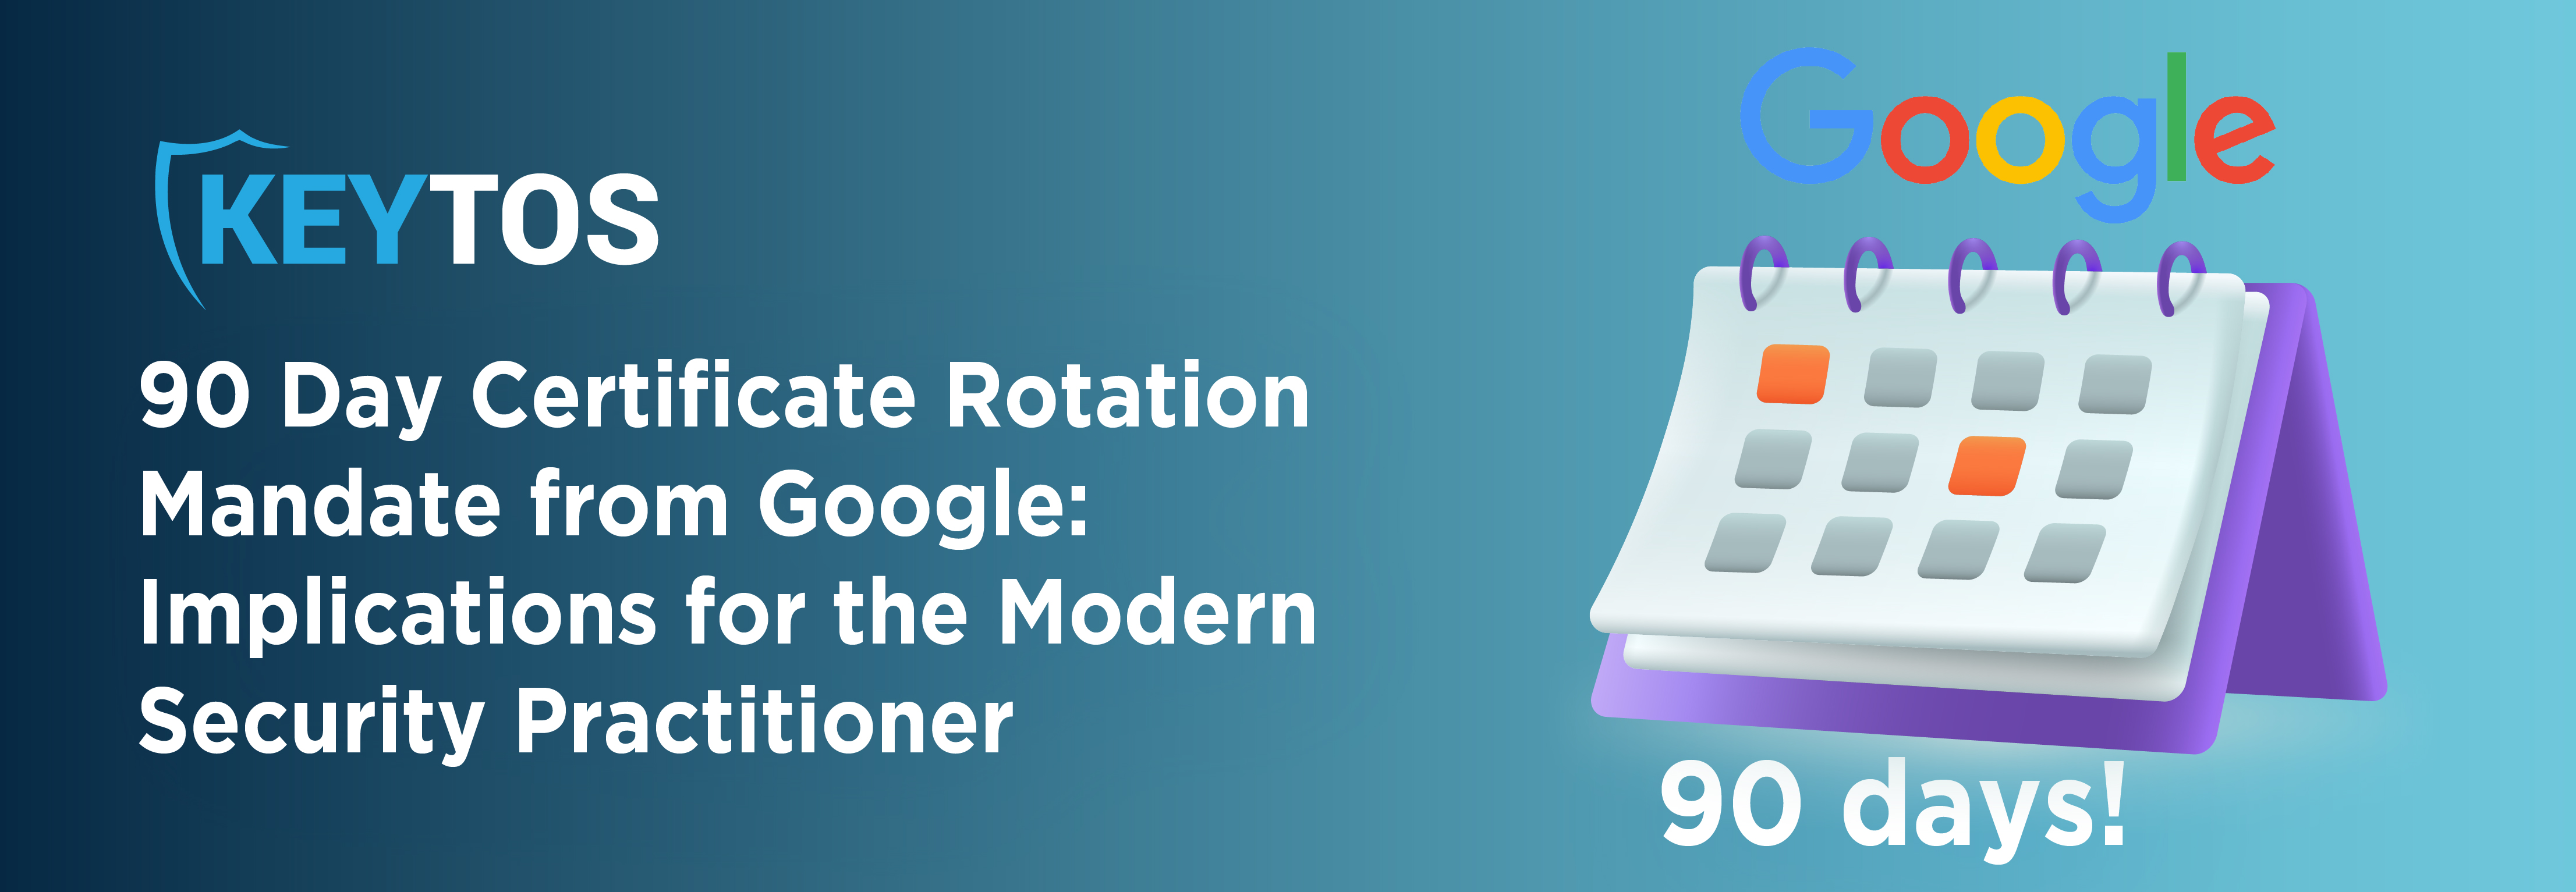 What does Google's 90-day certificate rotation mandate mean for your organization?